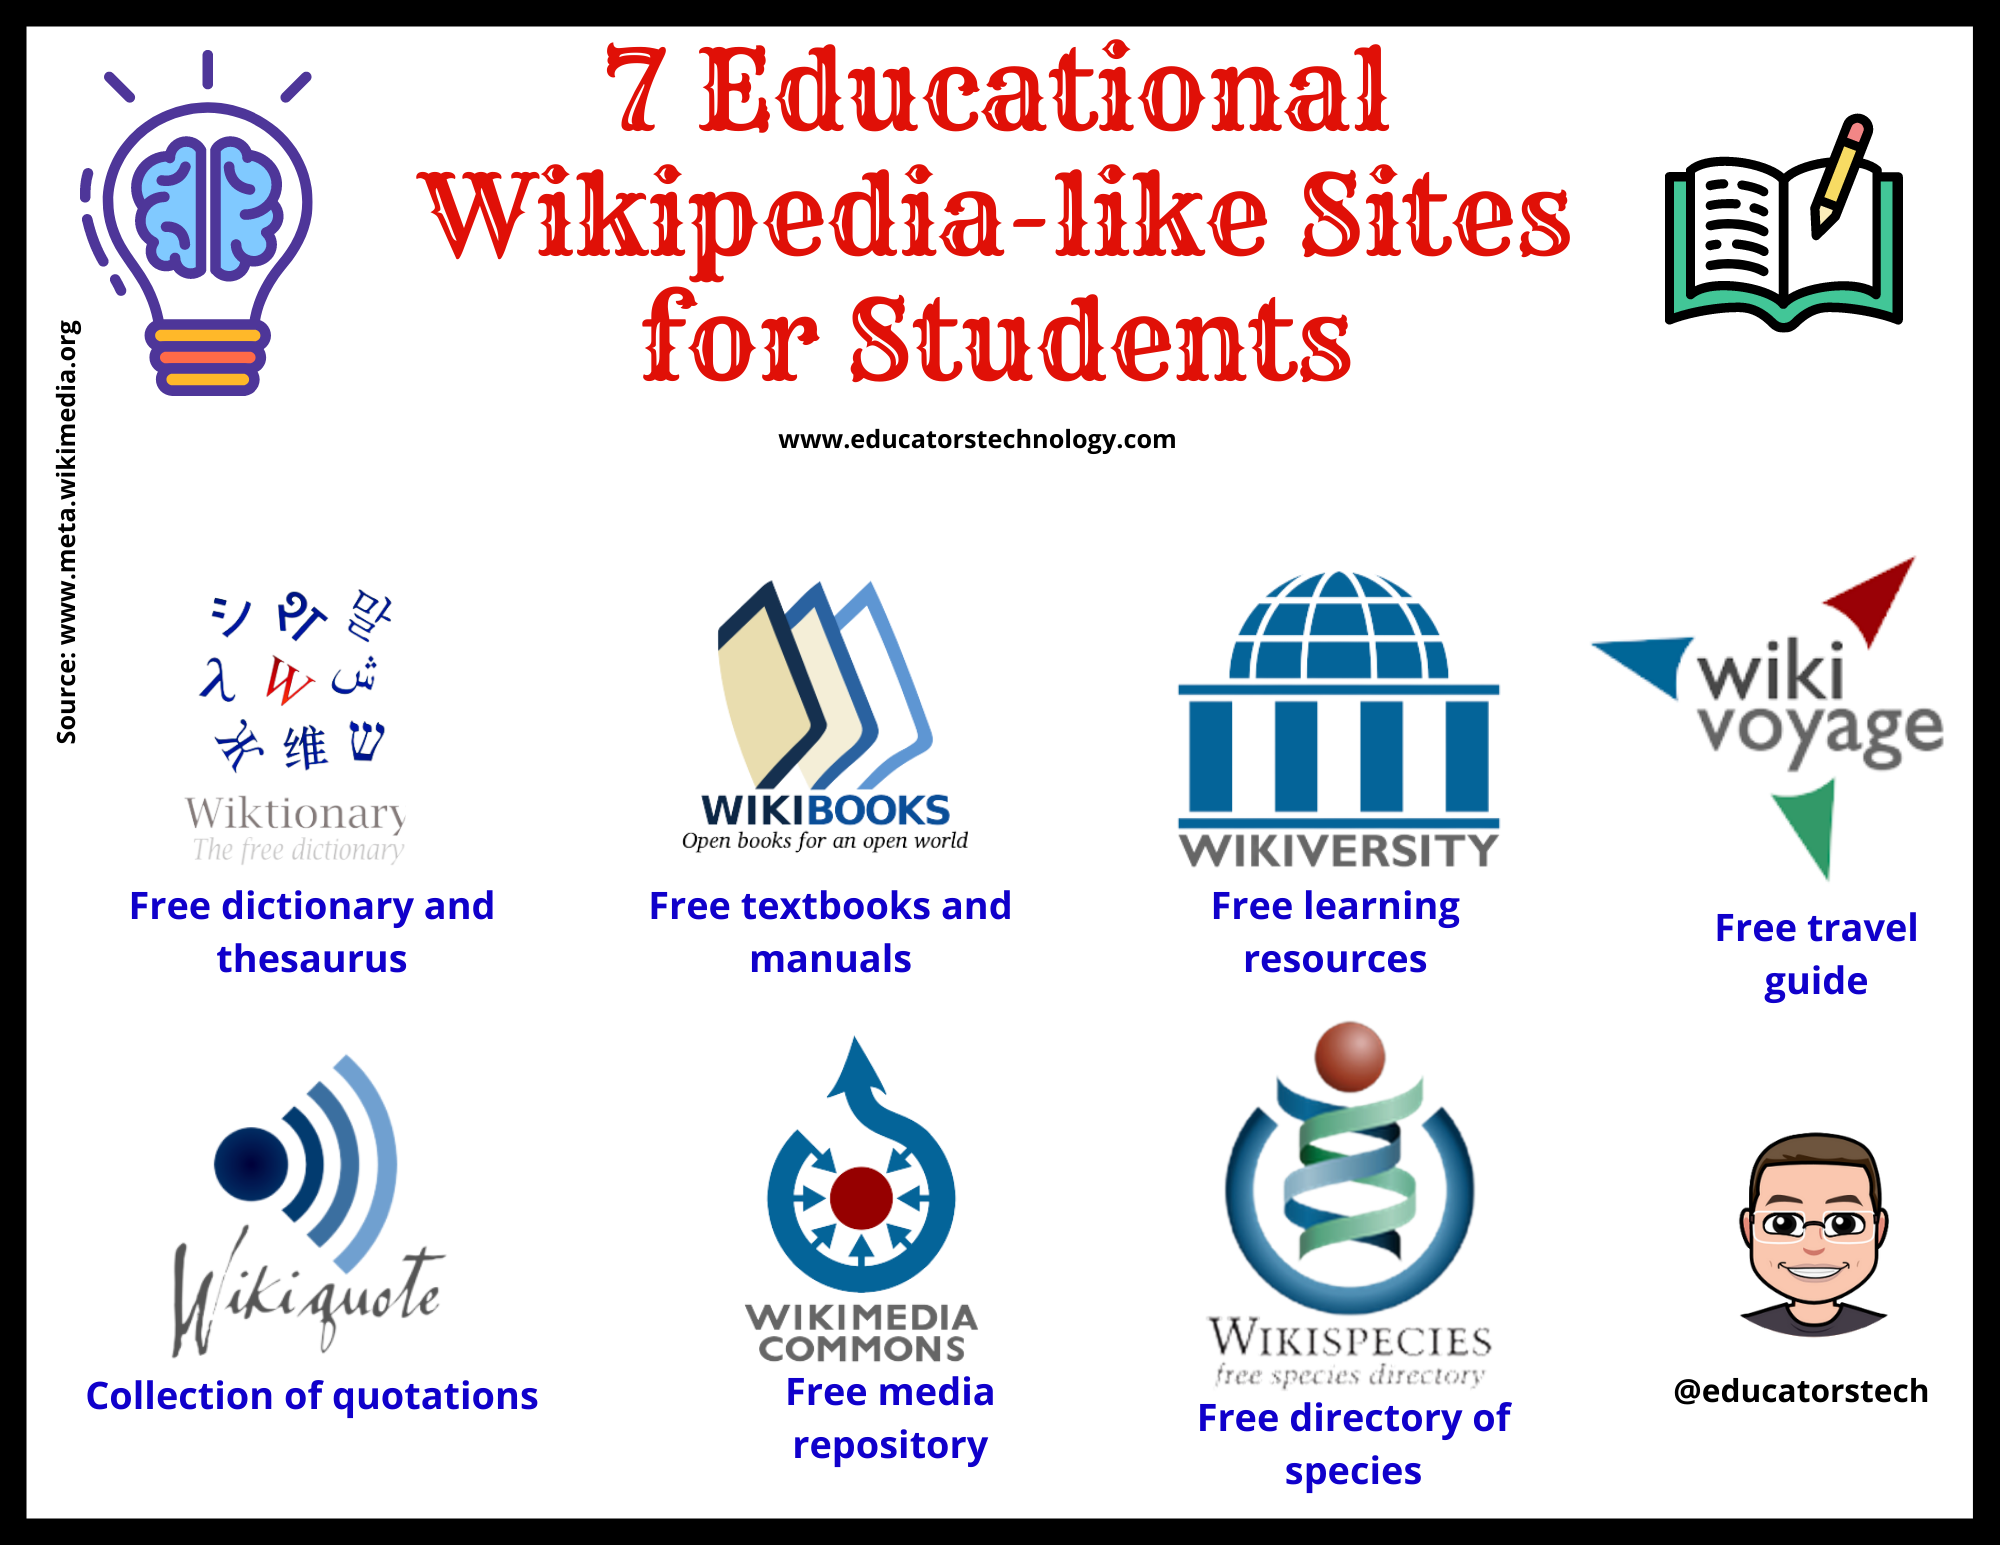 7 Educational Wikipedia-like Sites for Students